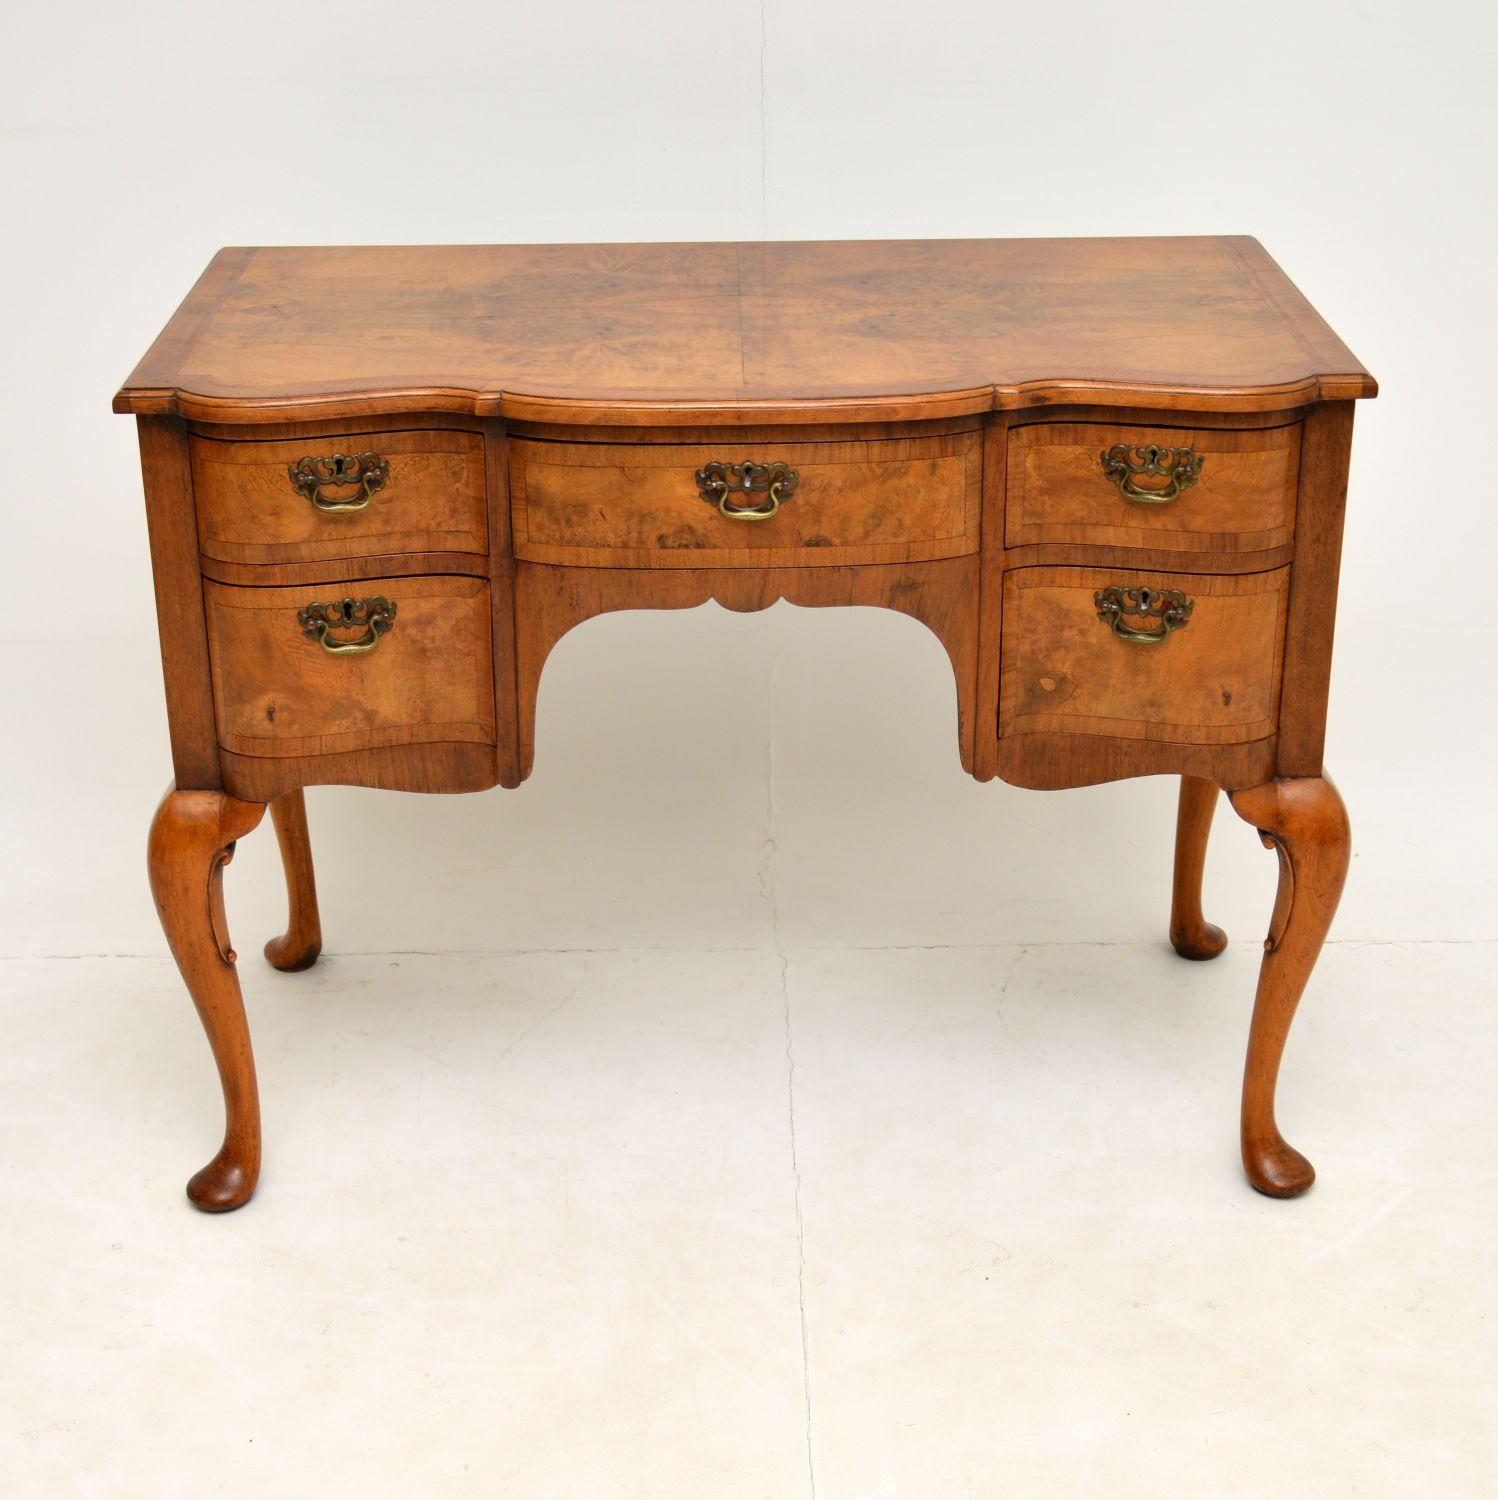 A stunning antique lowboy in burr walnut, in the Georgian style. This dates from around the 1900-1920 period & was made in England.

This is of extremely fine quality, with beautiful burr walnut veneers on solid walnut construction. The top is